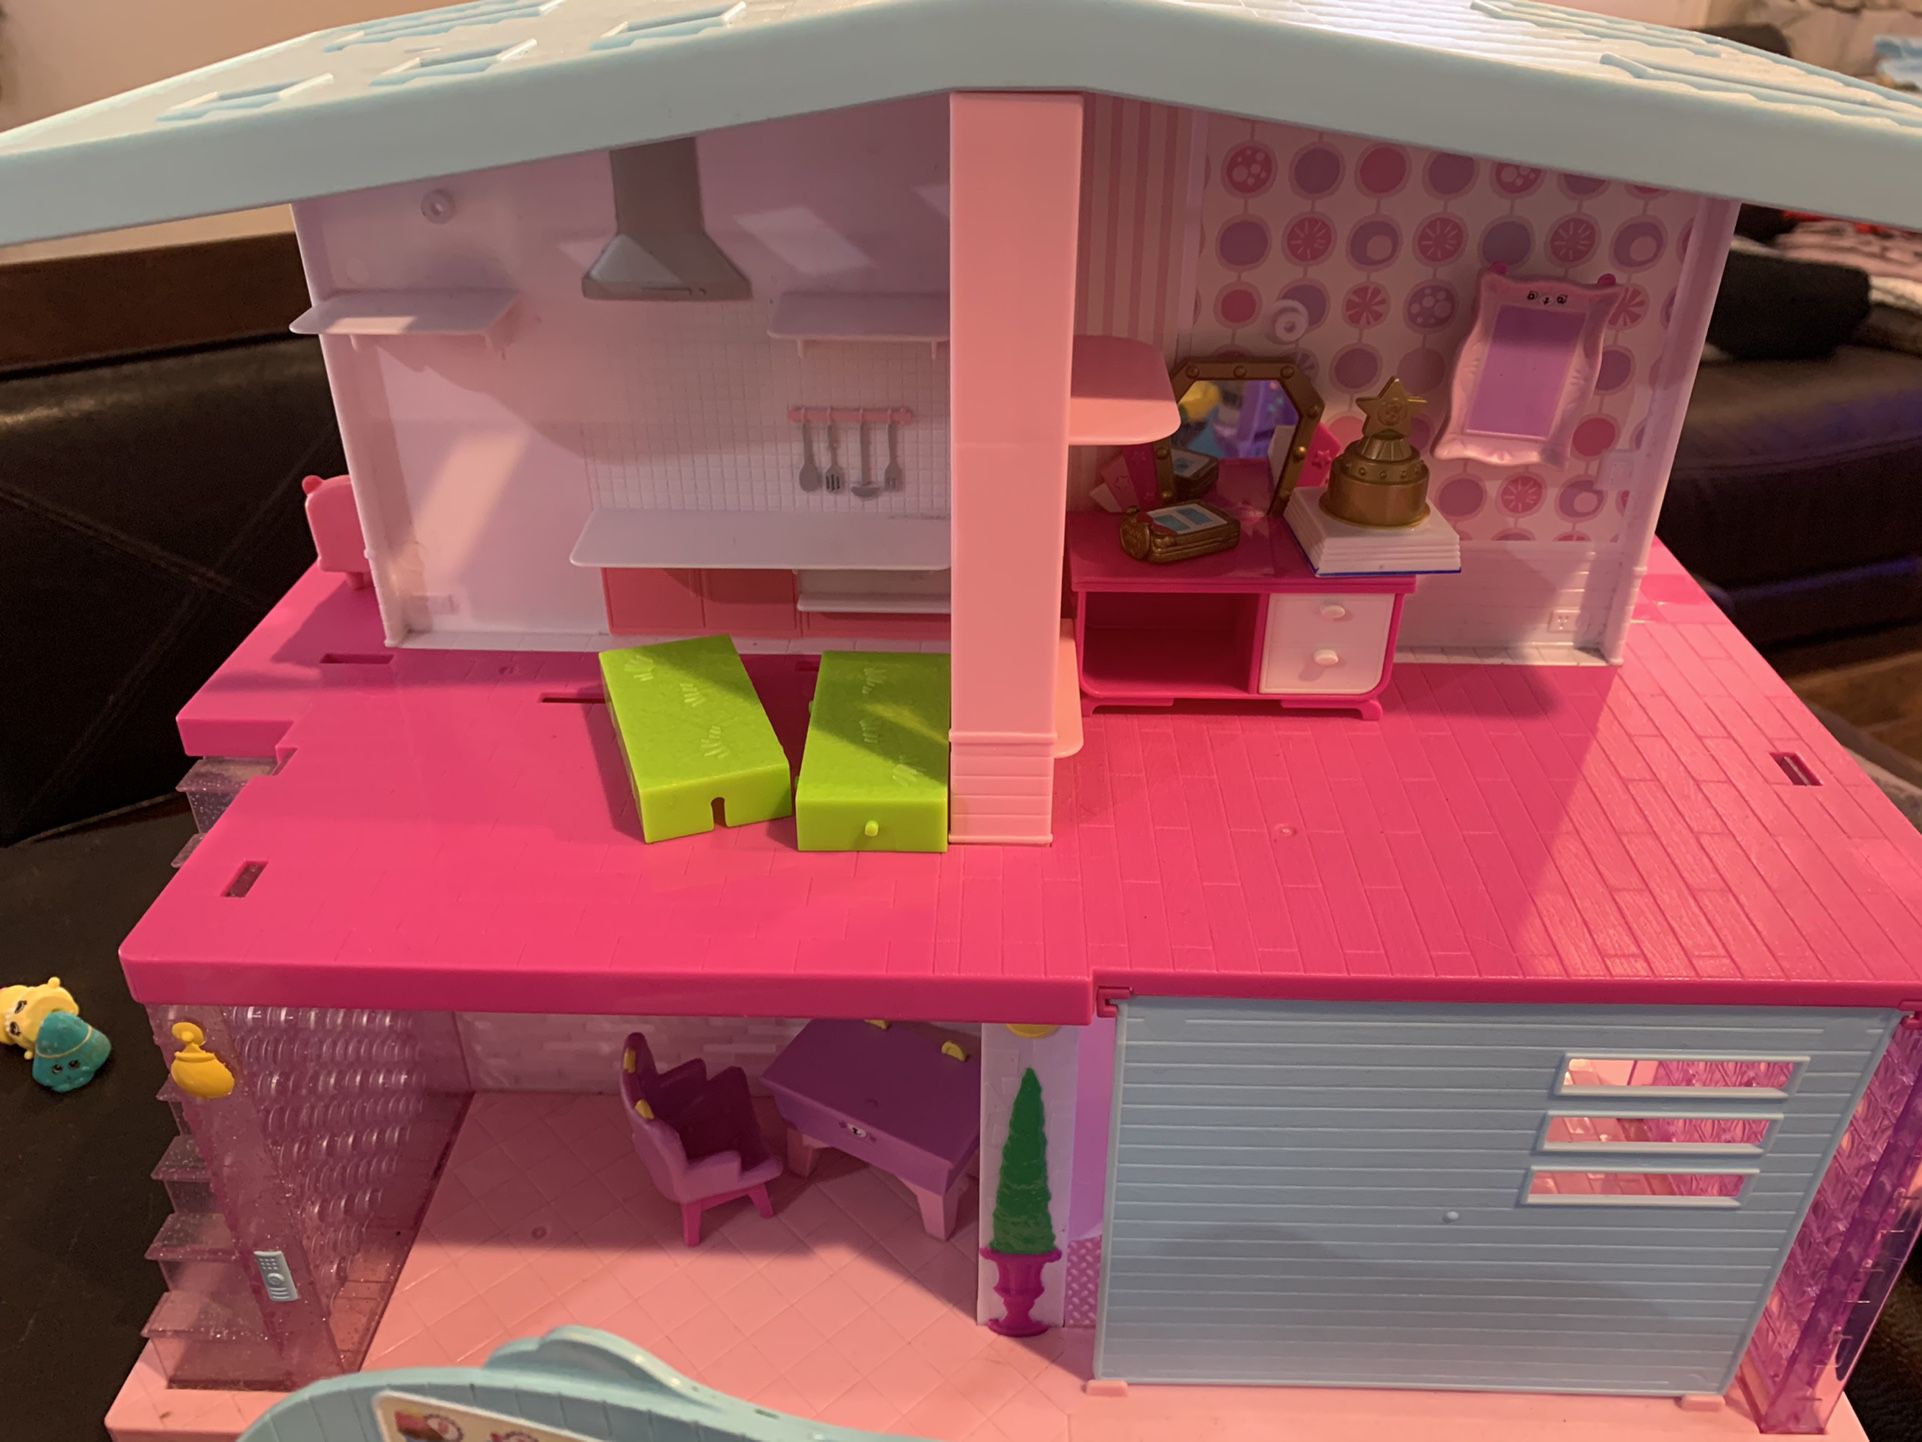 Shopkins Happy Places Grand Mansion Playset